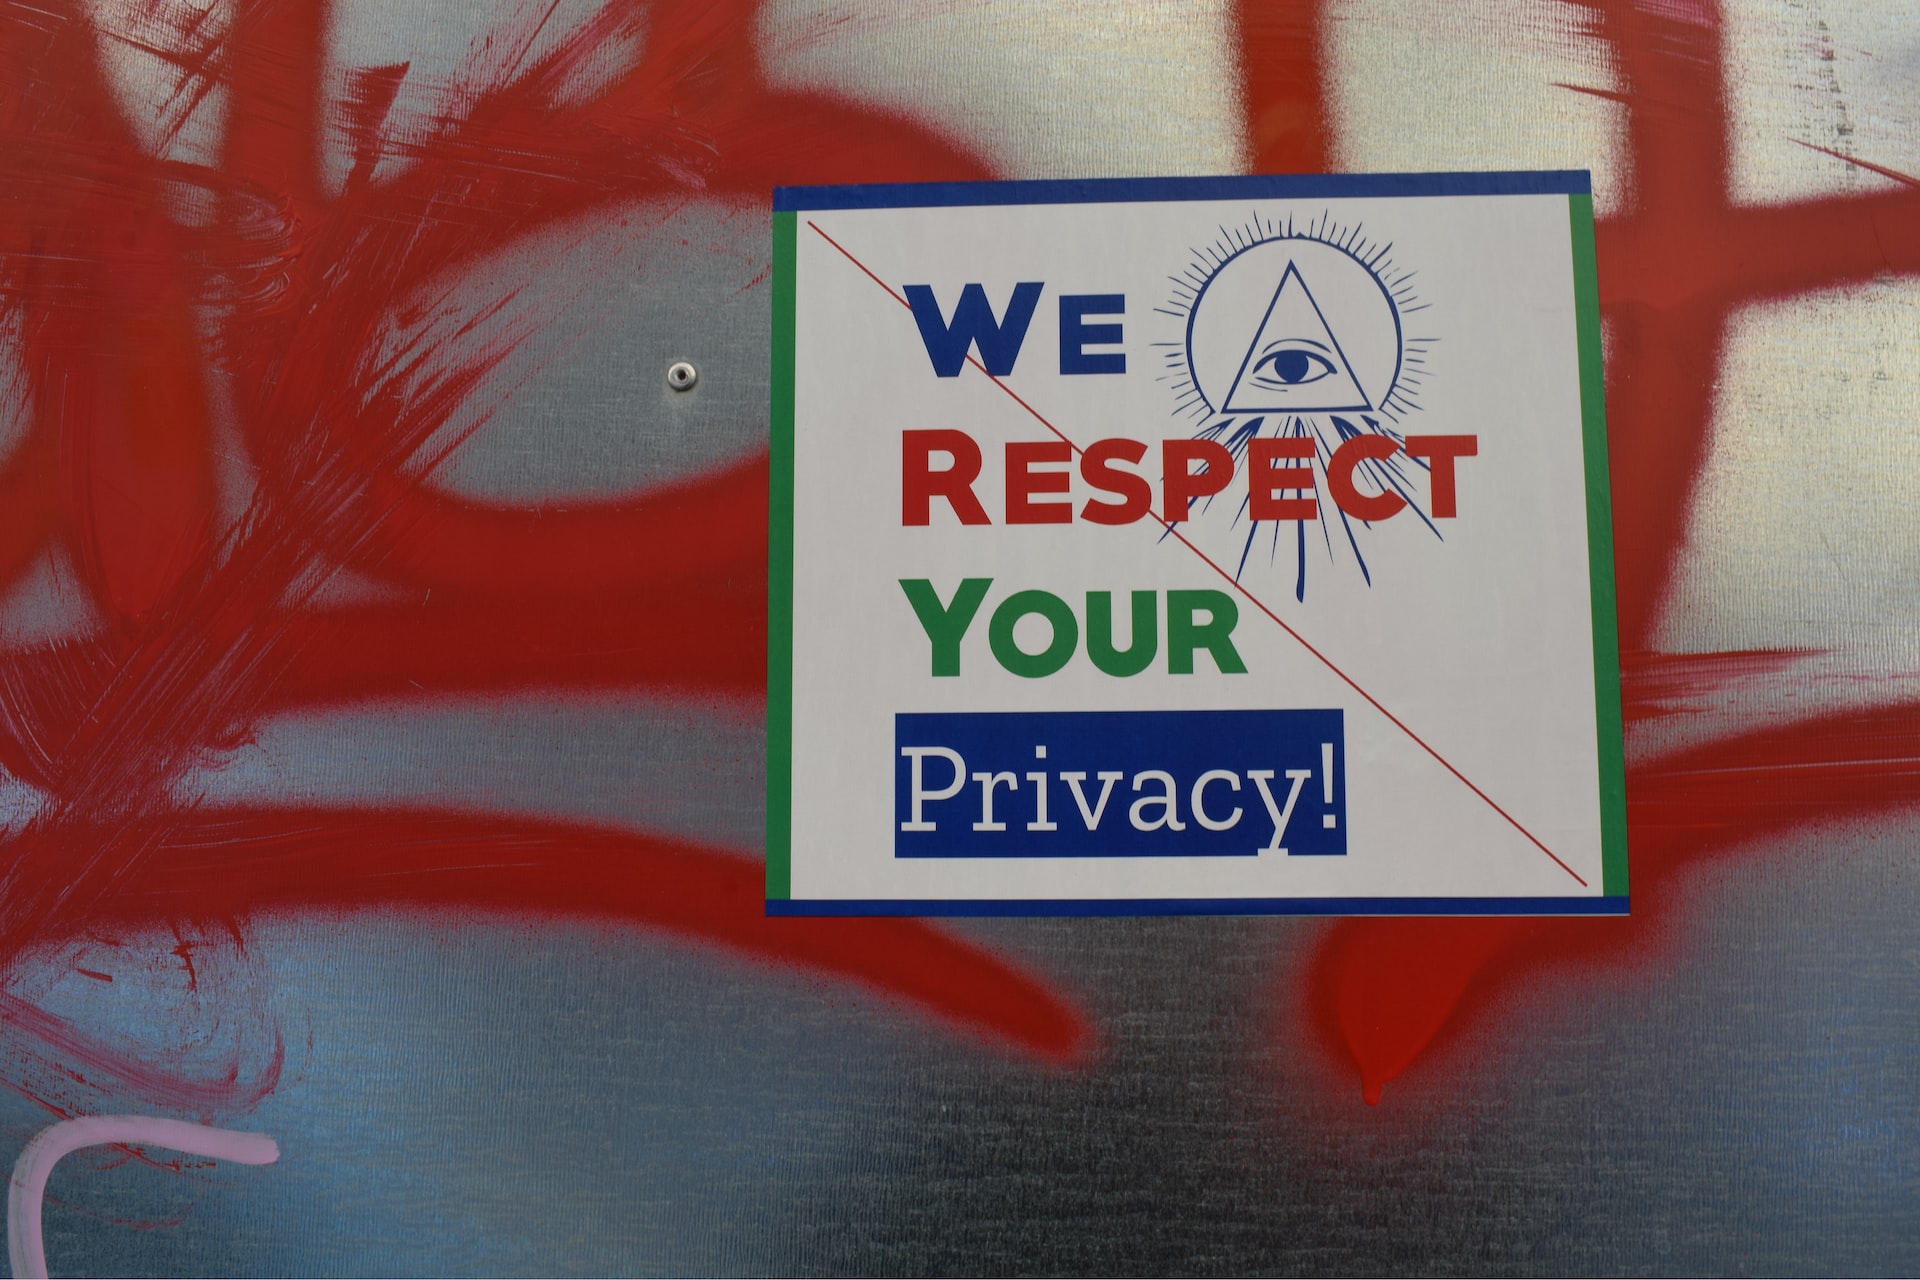 Choose software providers that respect your privacy.